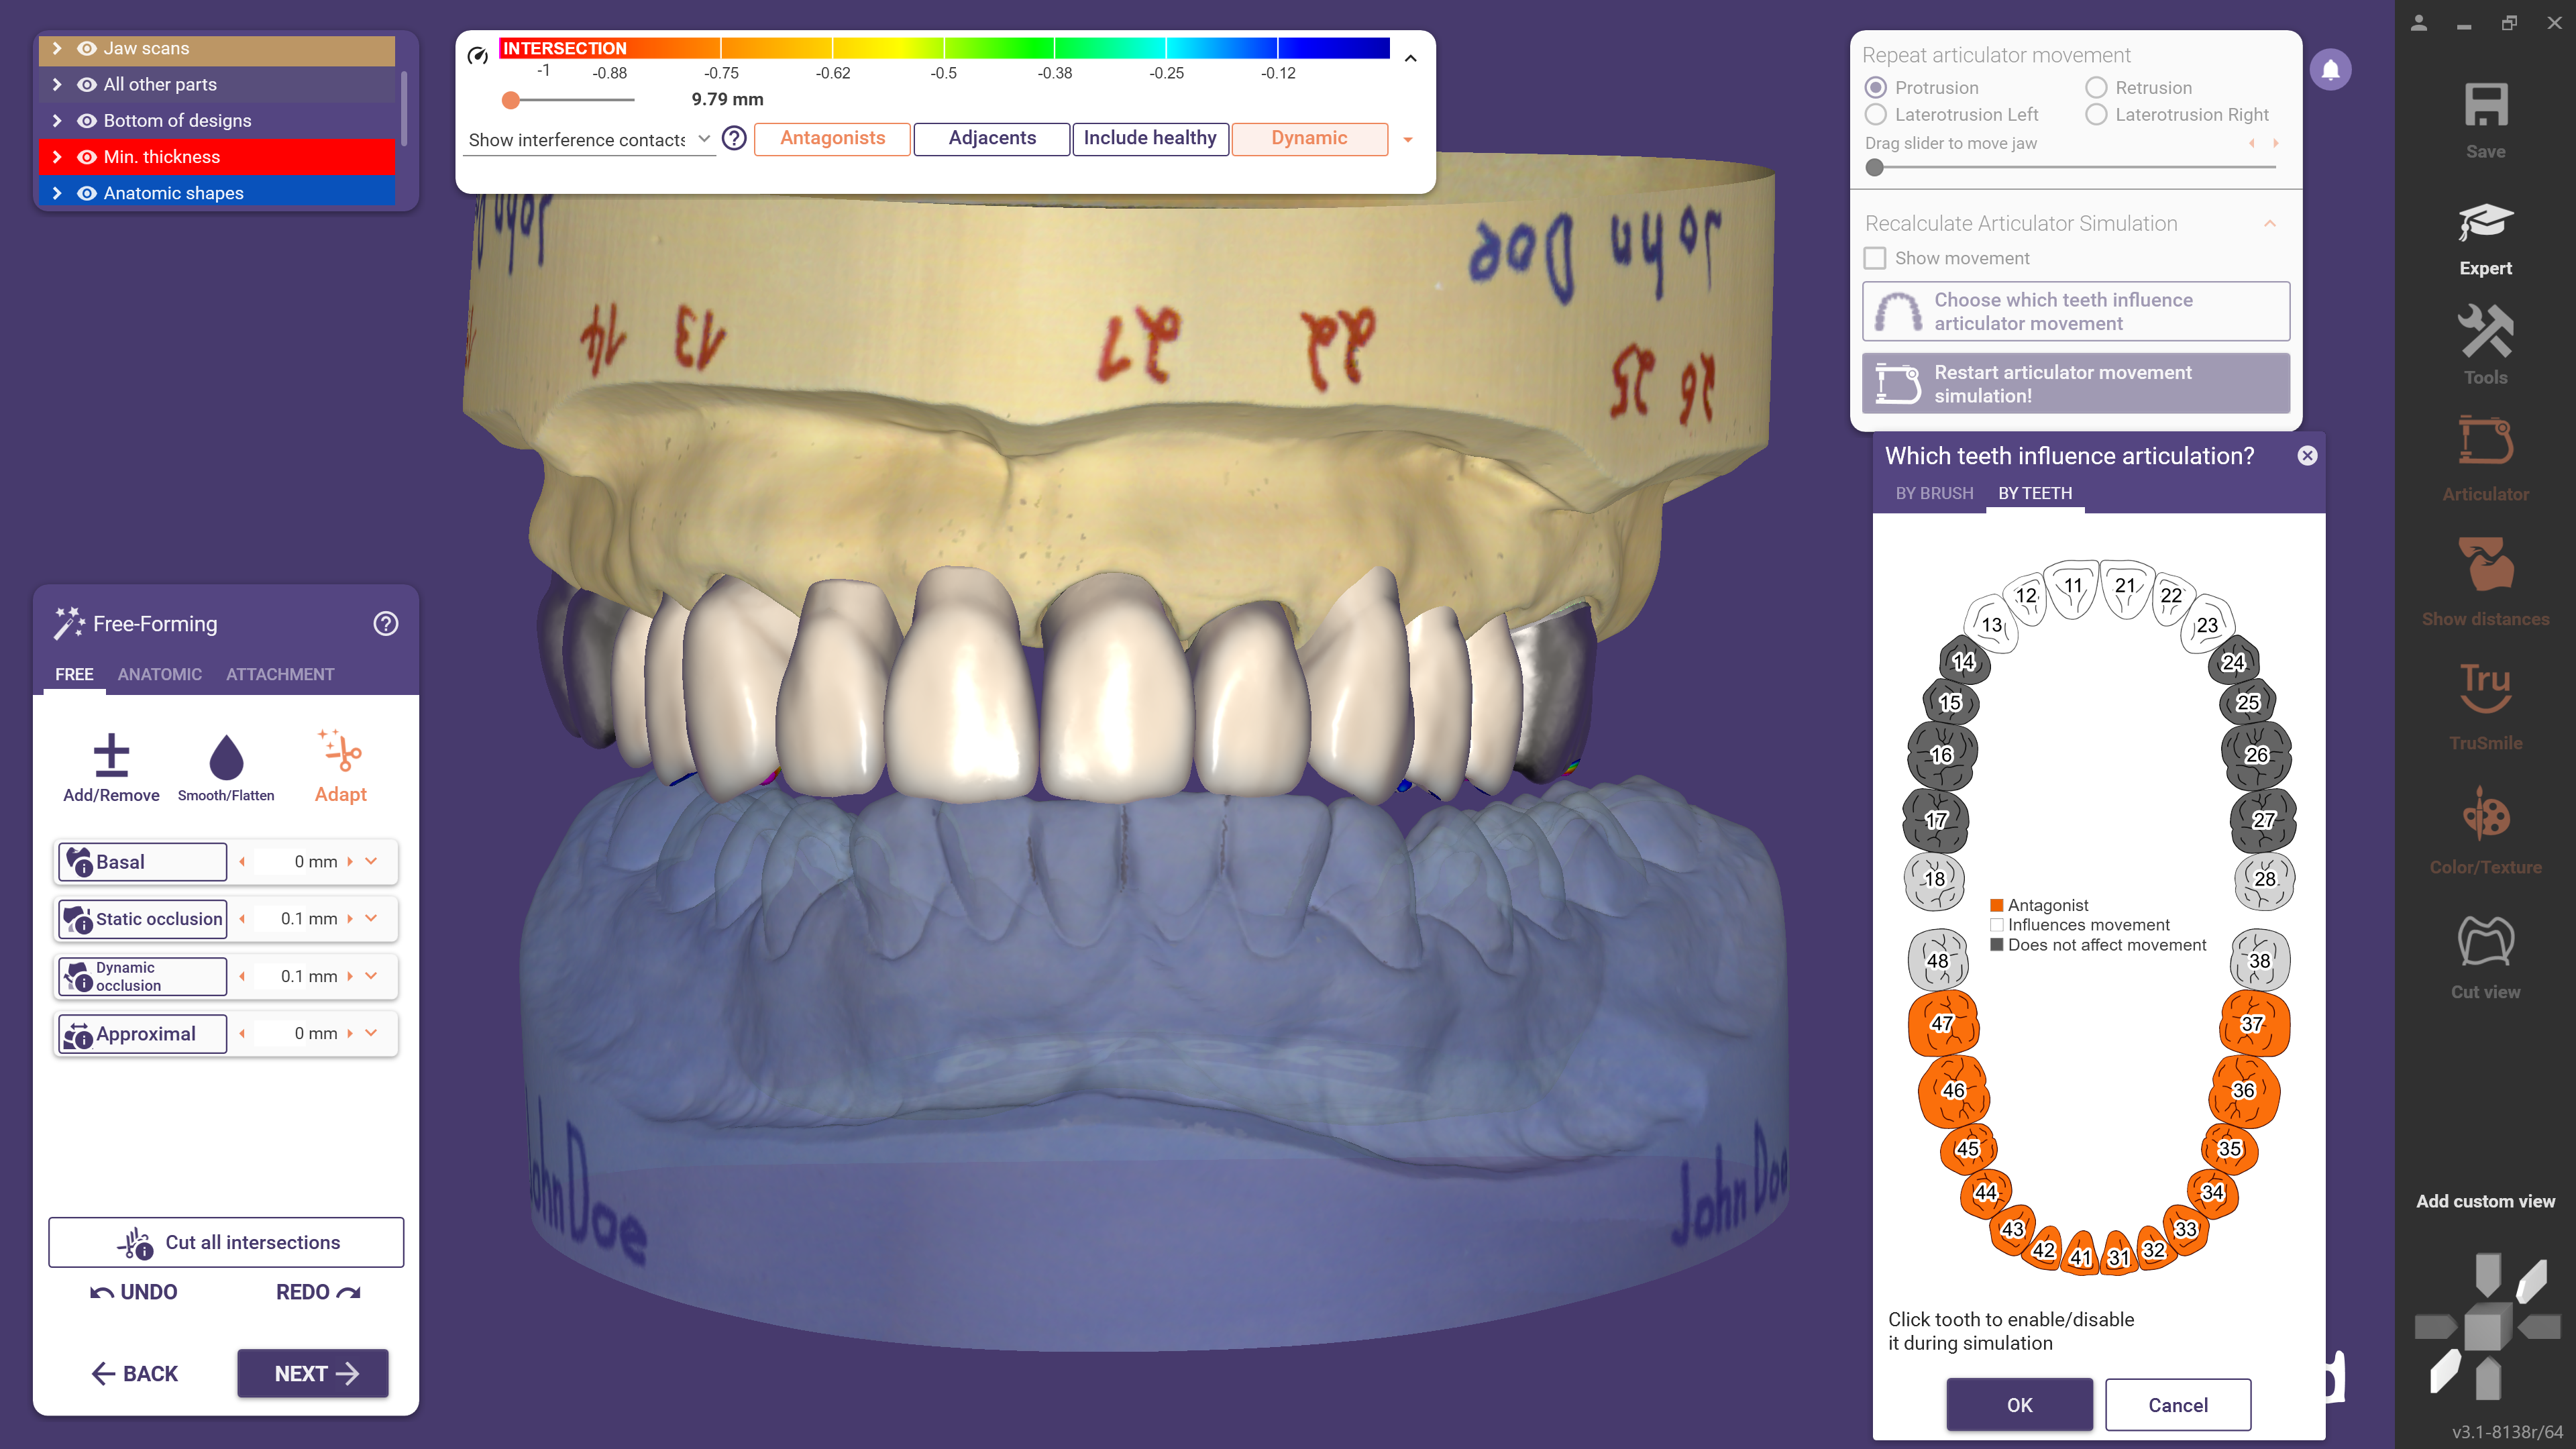 The Virtual Articulator can be opened directly in free-form mode in DentalCAD 3.1 Rijeka. (Image: exocad)